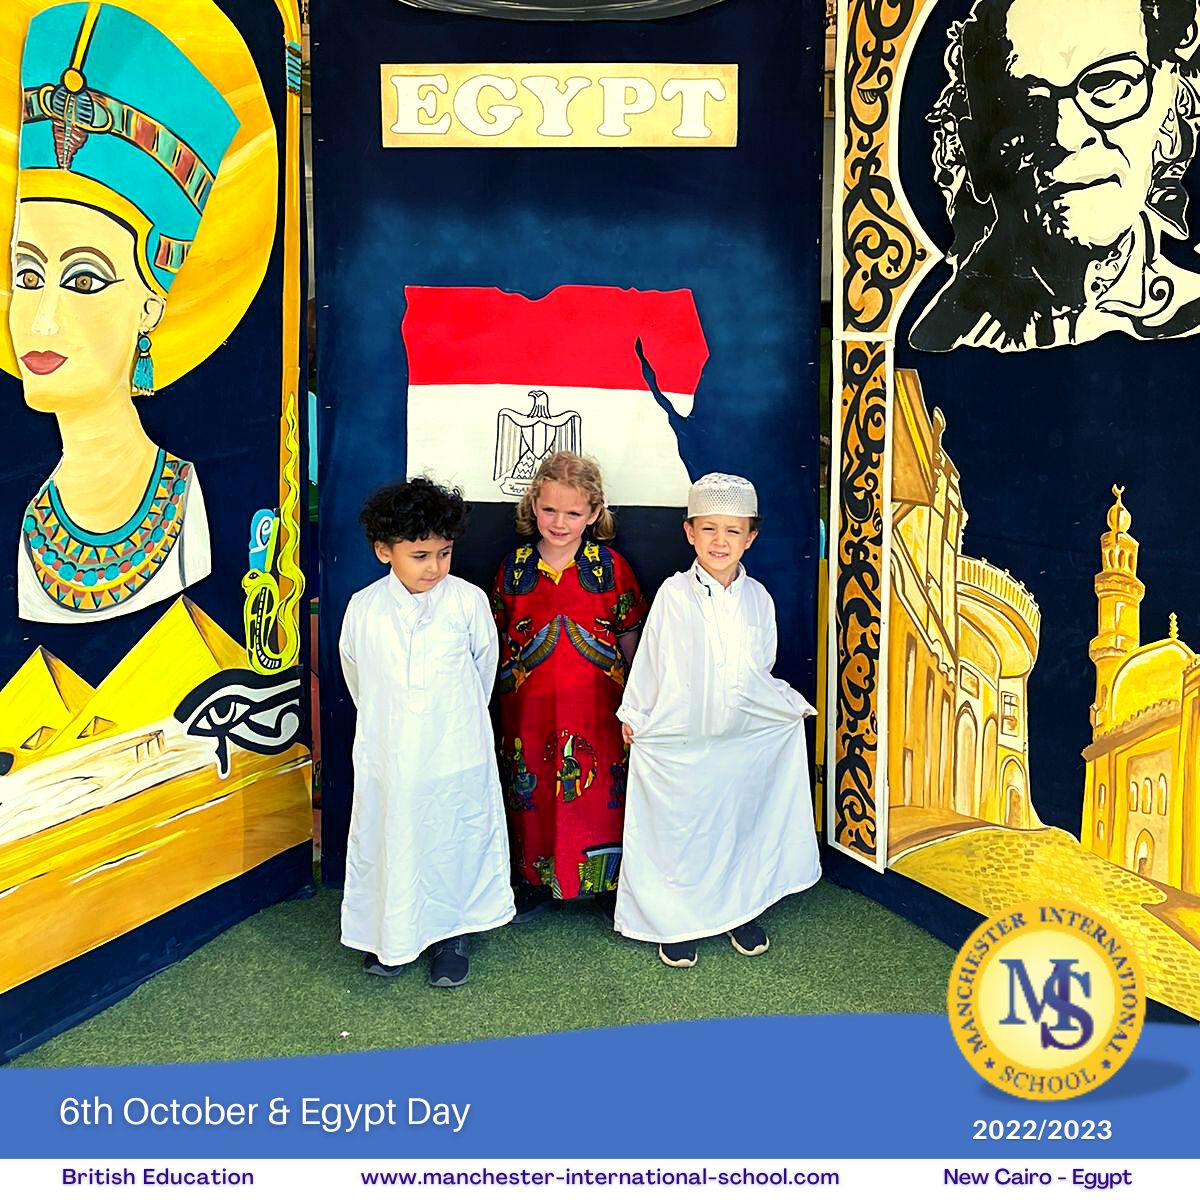 6th October & Egypt Day